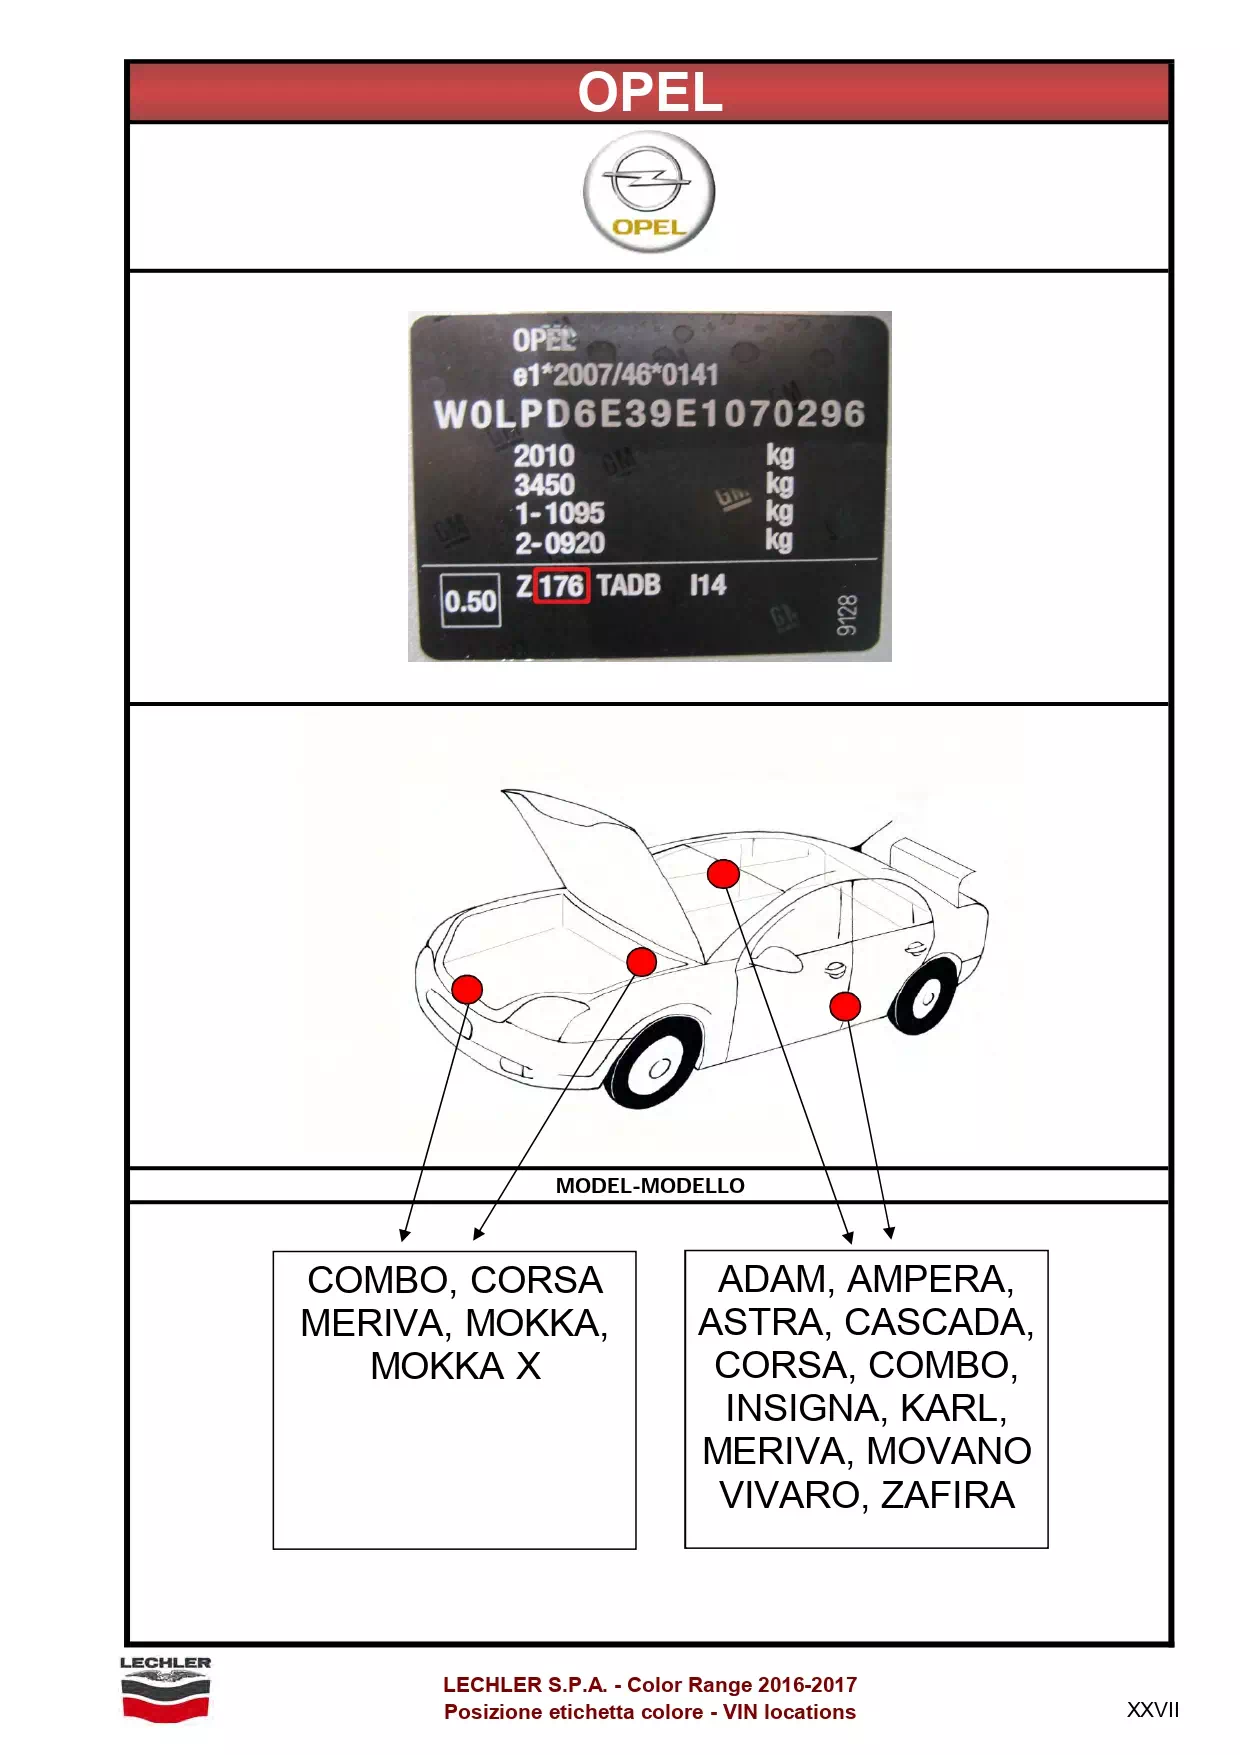 Picture showing how to look up a paint code on the vehicle or how to find the paint code sticker